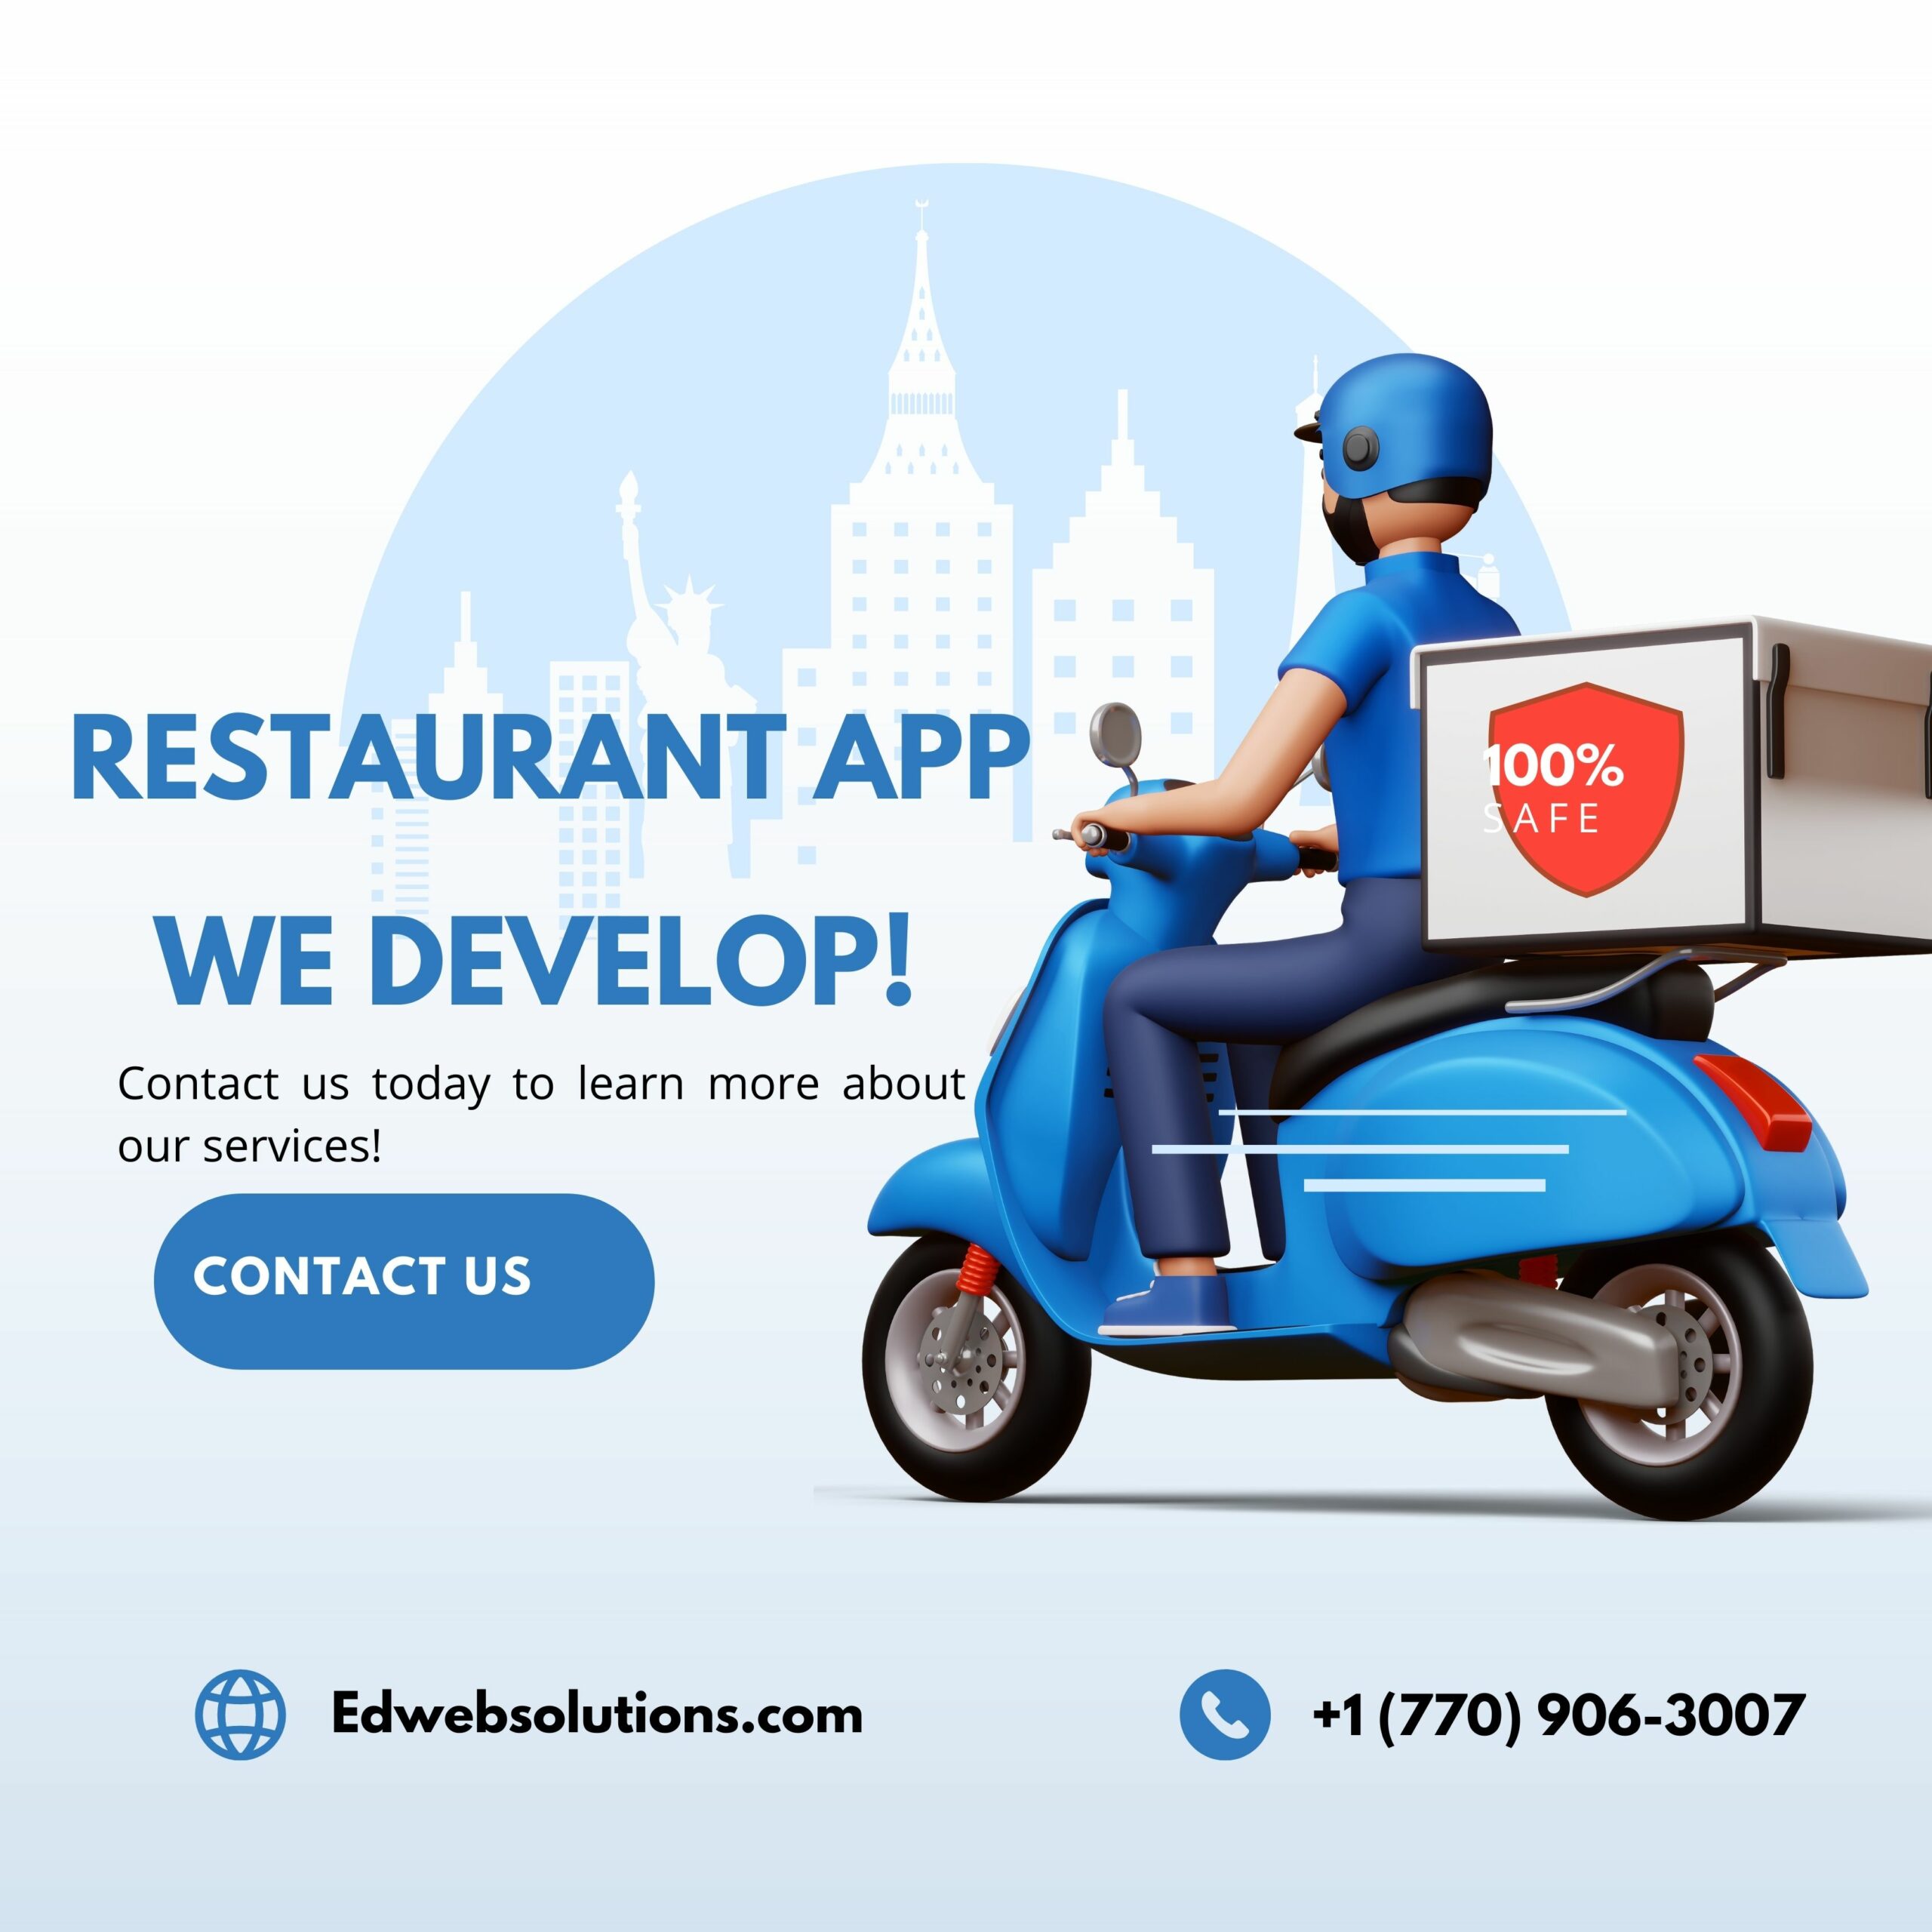 Benefits of Having a Dedicated Mobile App for a Restaurant